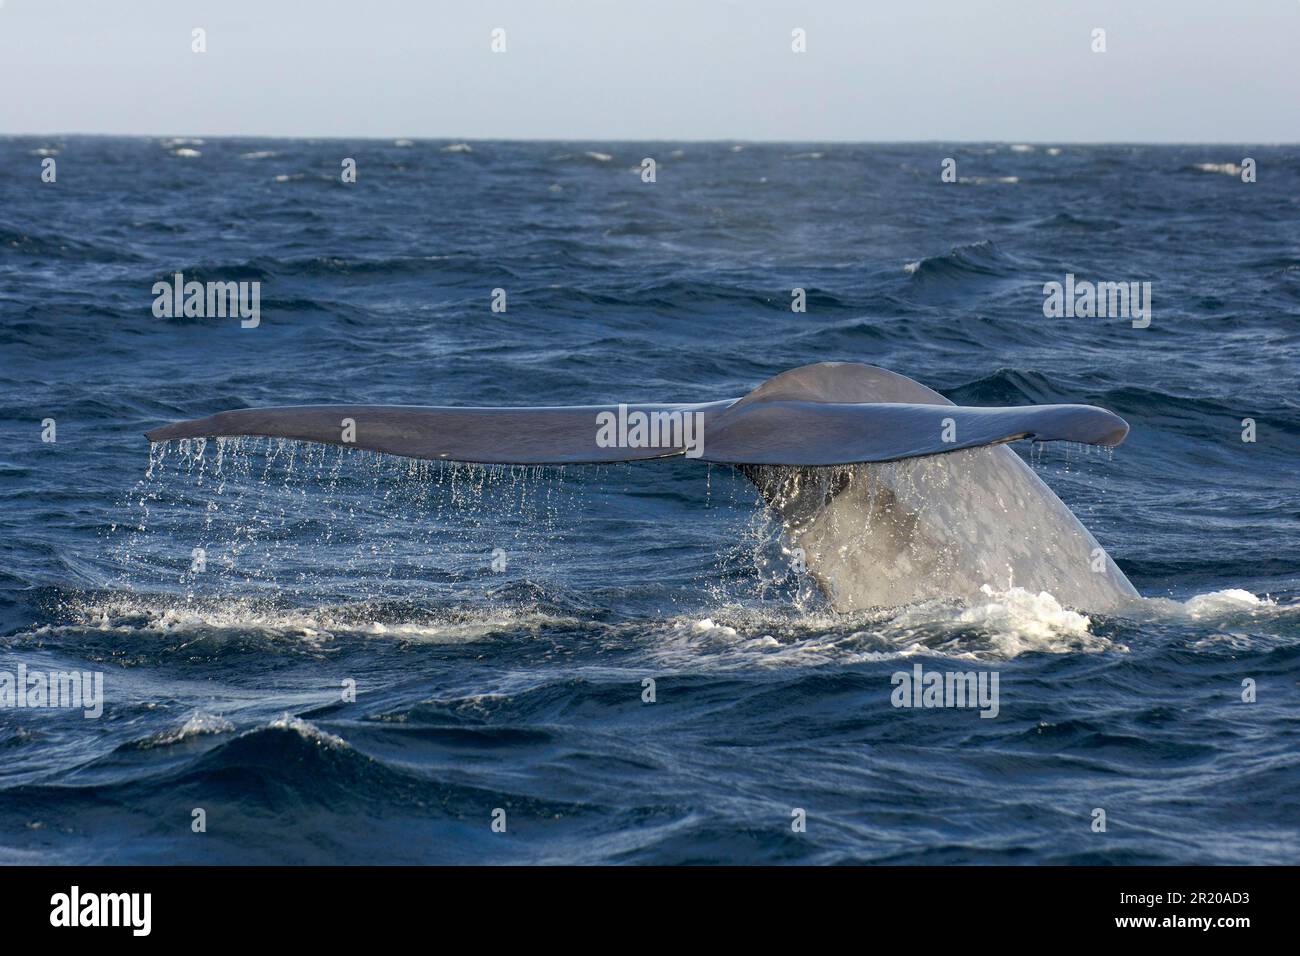 Blue whale (Balaenoptera musculus) adult, tail fin raised, preparing to dive, Sea of Cortez, Mexico Stock Photo